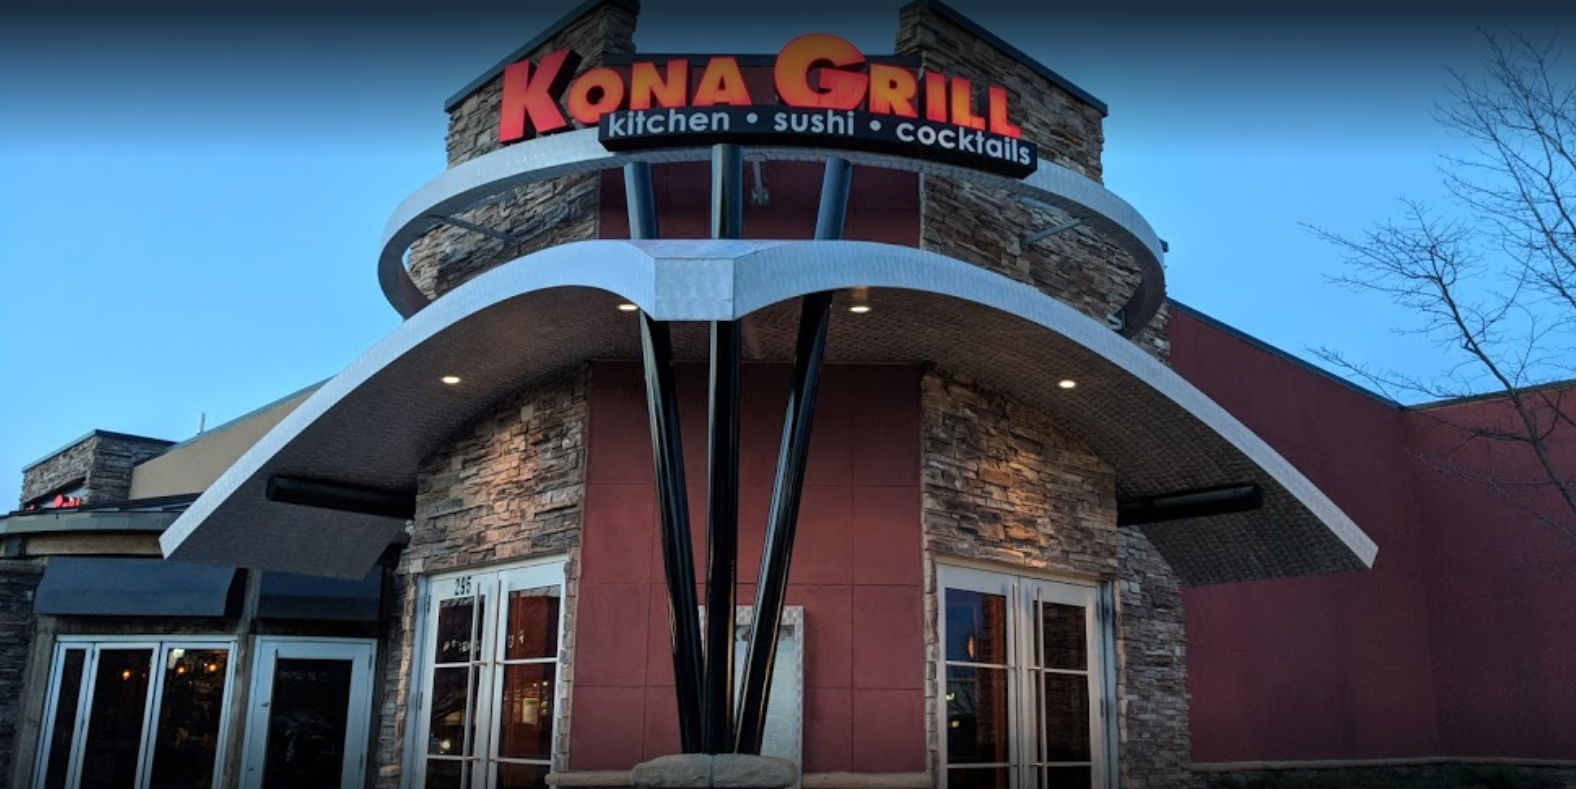 Kona Grill Takeout promotional image